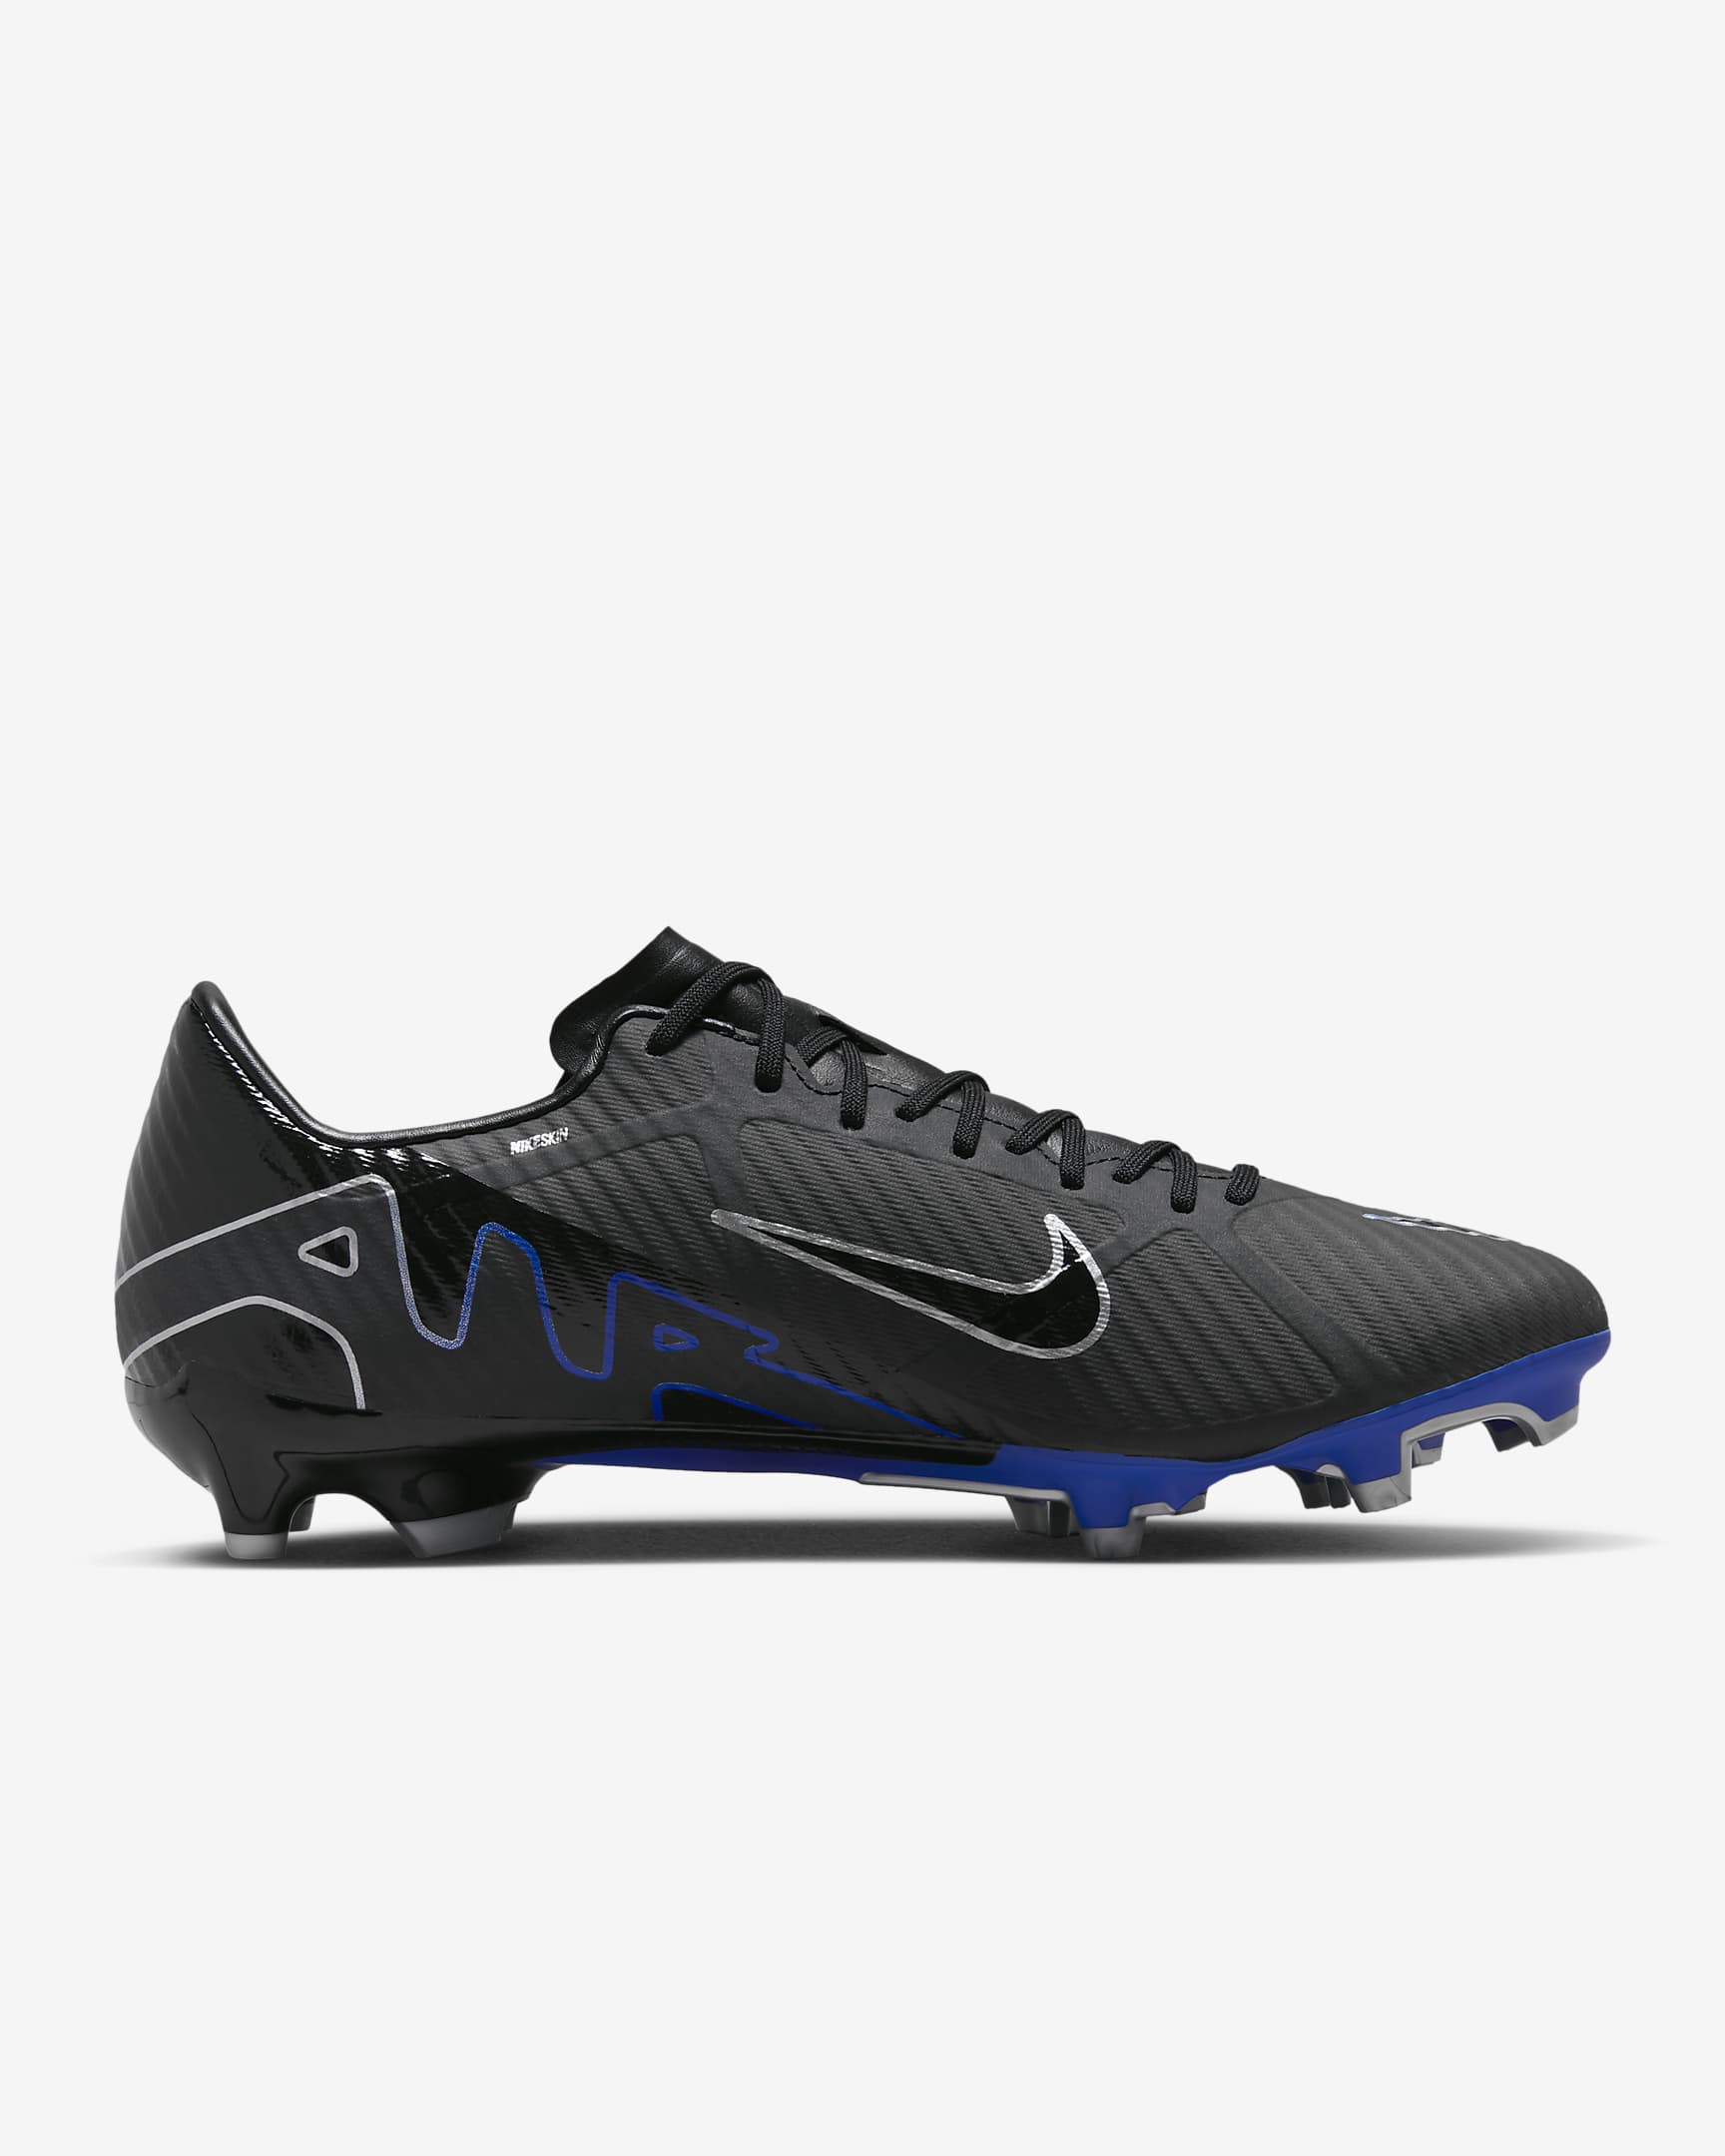 Nike Mercurial Vapor 15 Academy Multi-Ground Low-Top Soccer Cleats ...